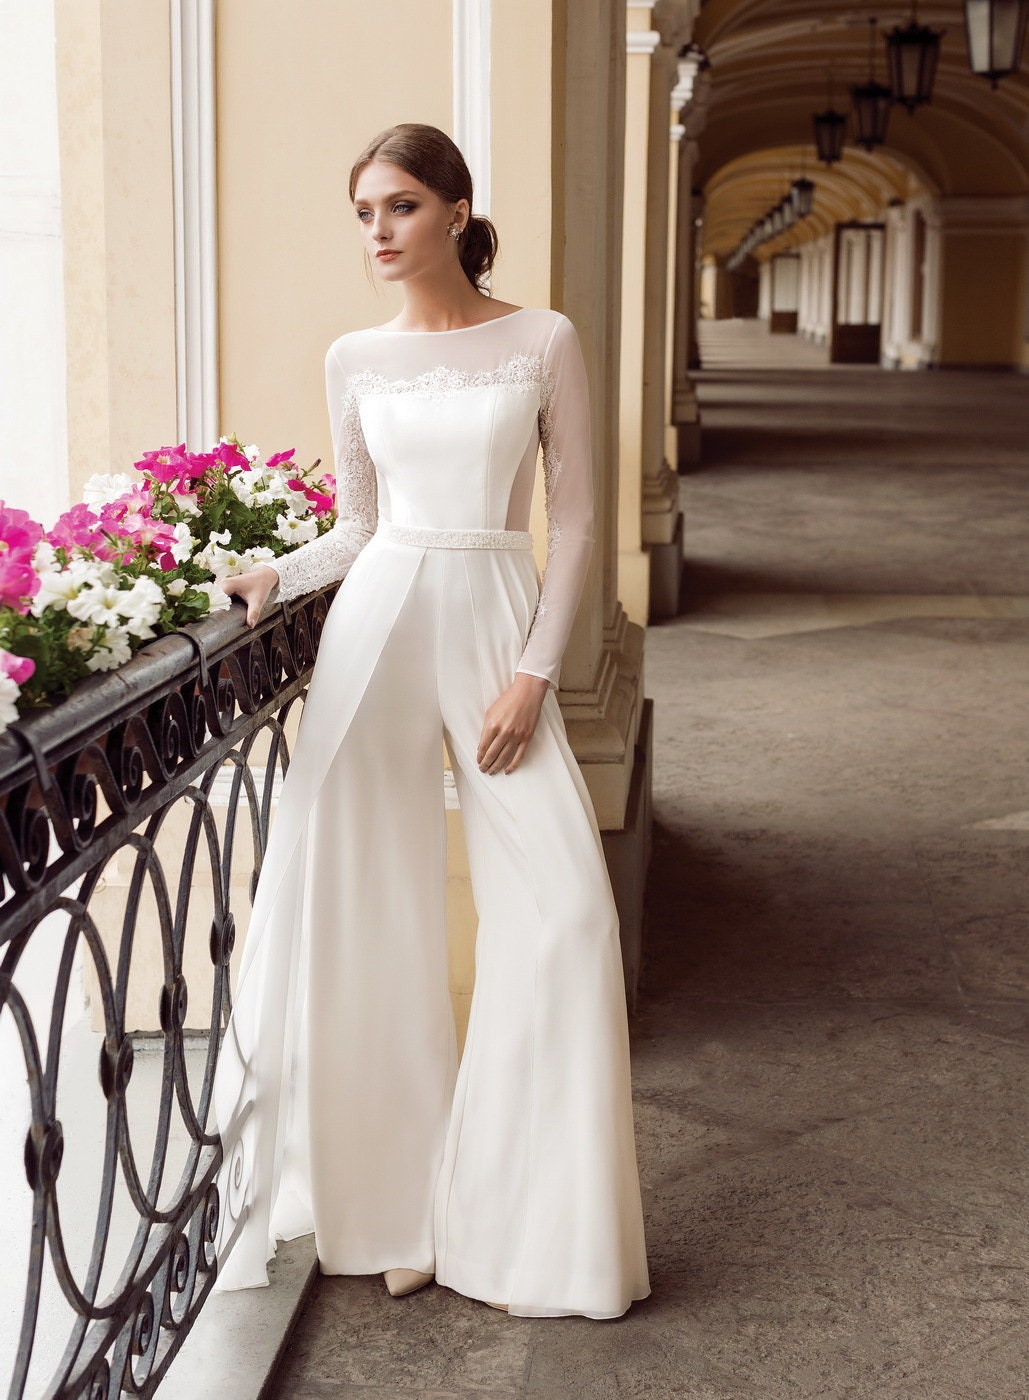 These bridal jumpsuits will make you rethink the wedding dress. • BRIARS  ATLAS - BRIARS ATLAS